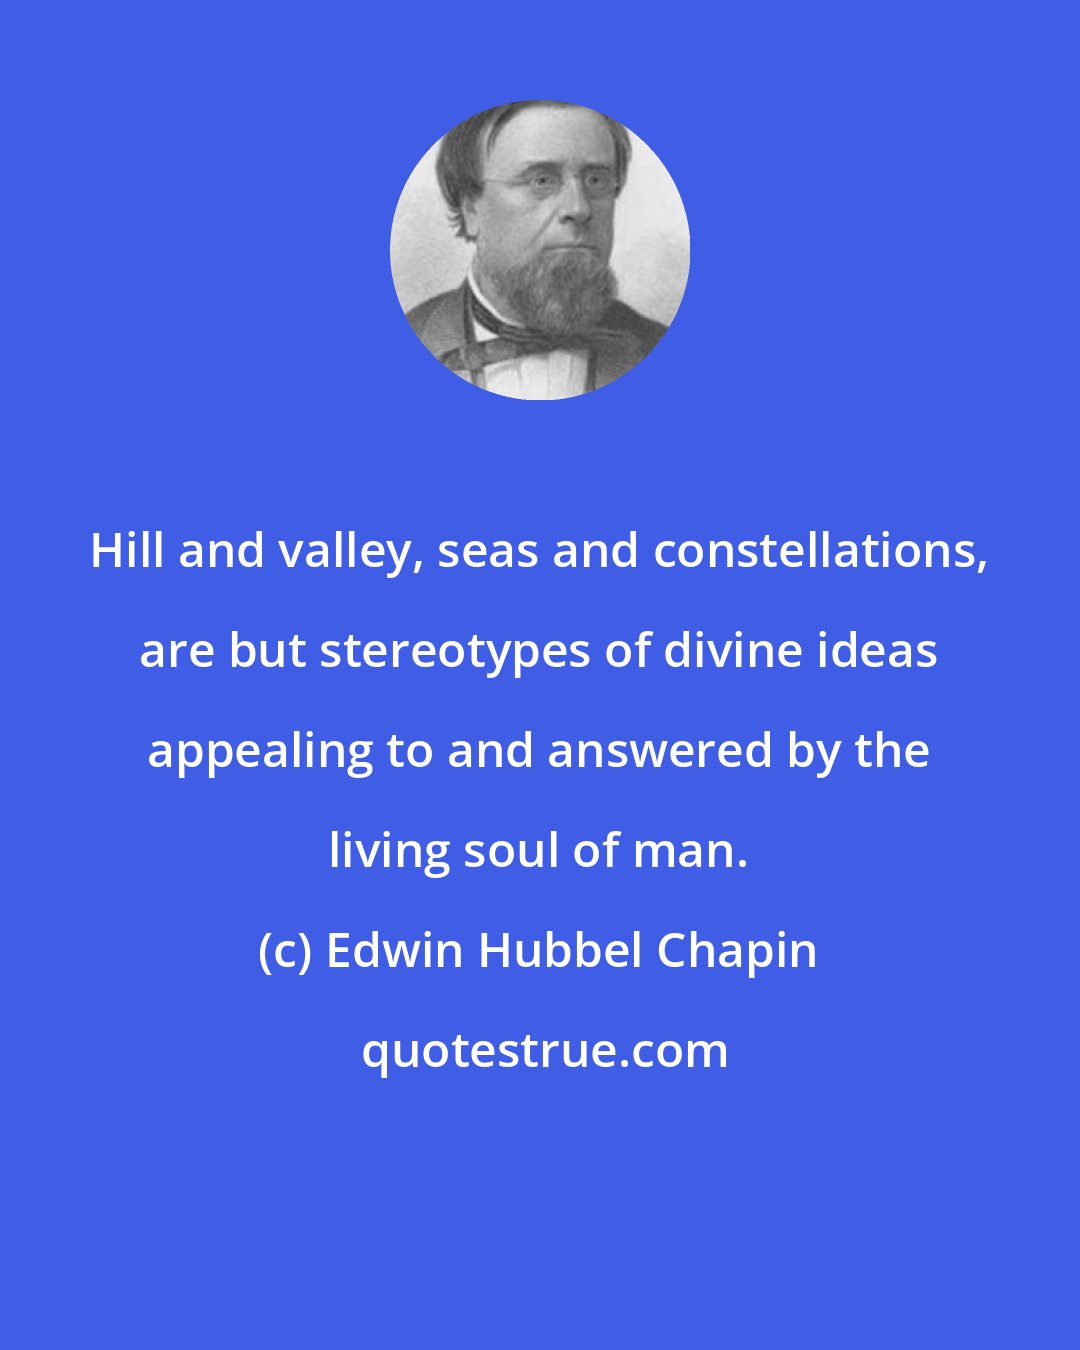 Edwin Hubbel Chapin: Hill and valley, seas and constellations, are but stereotypes of divine ideas appealing to and answered by the living soul of man.